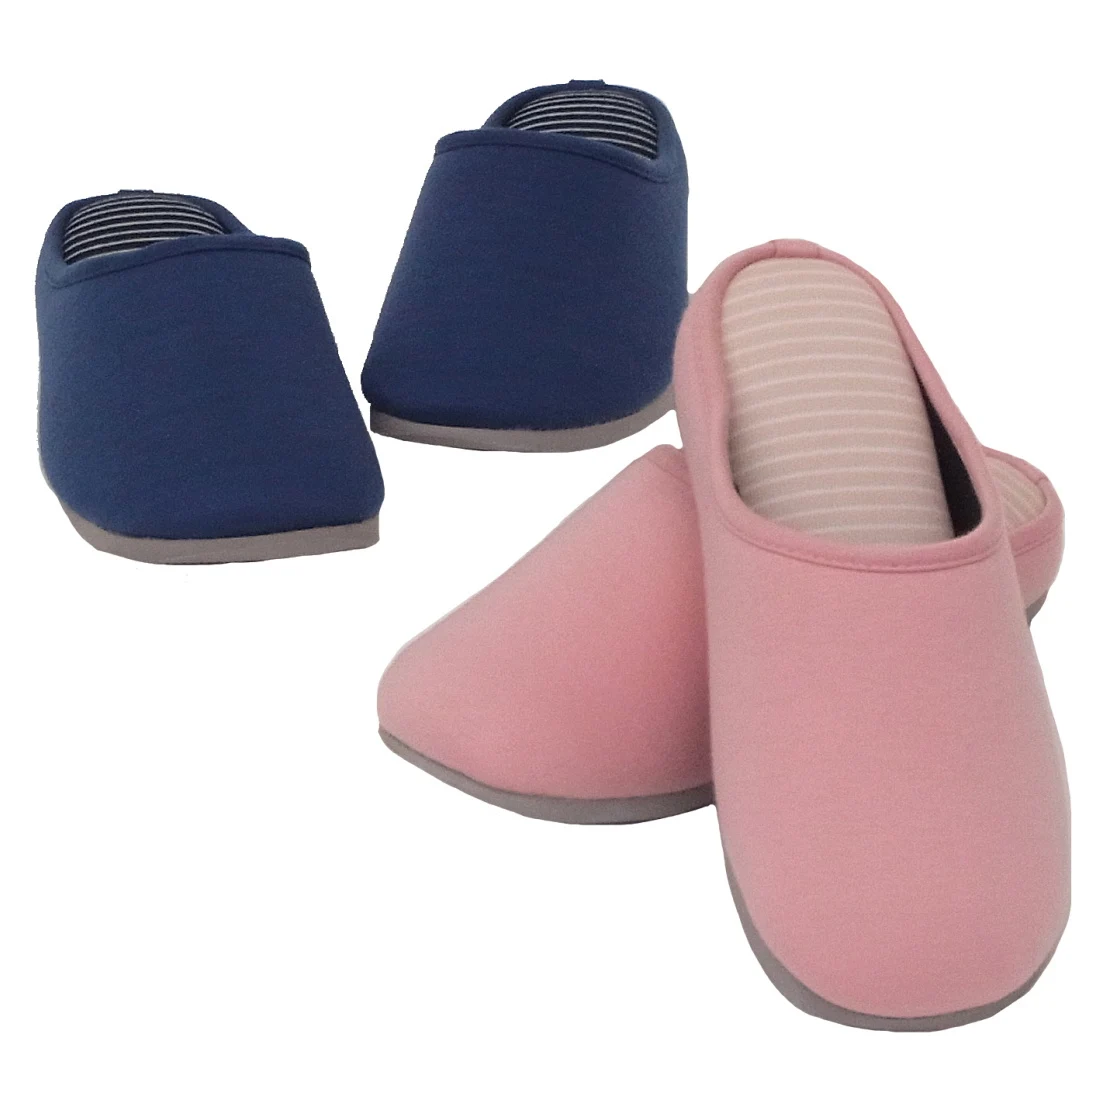 High quality eva material soft women living home slippers for sale